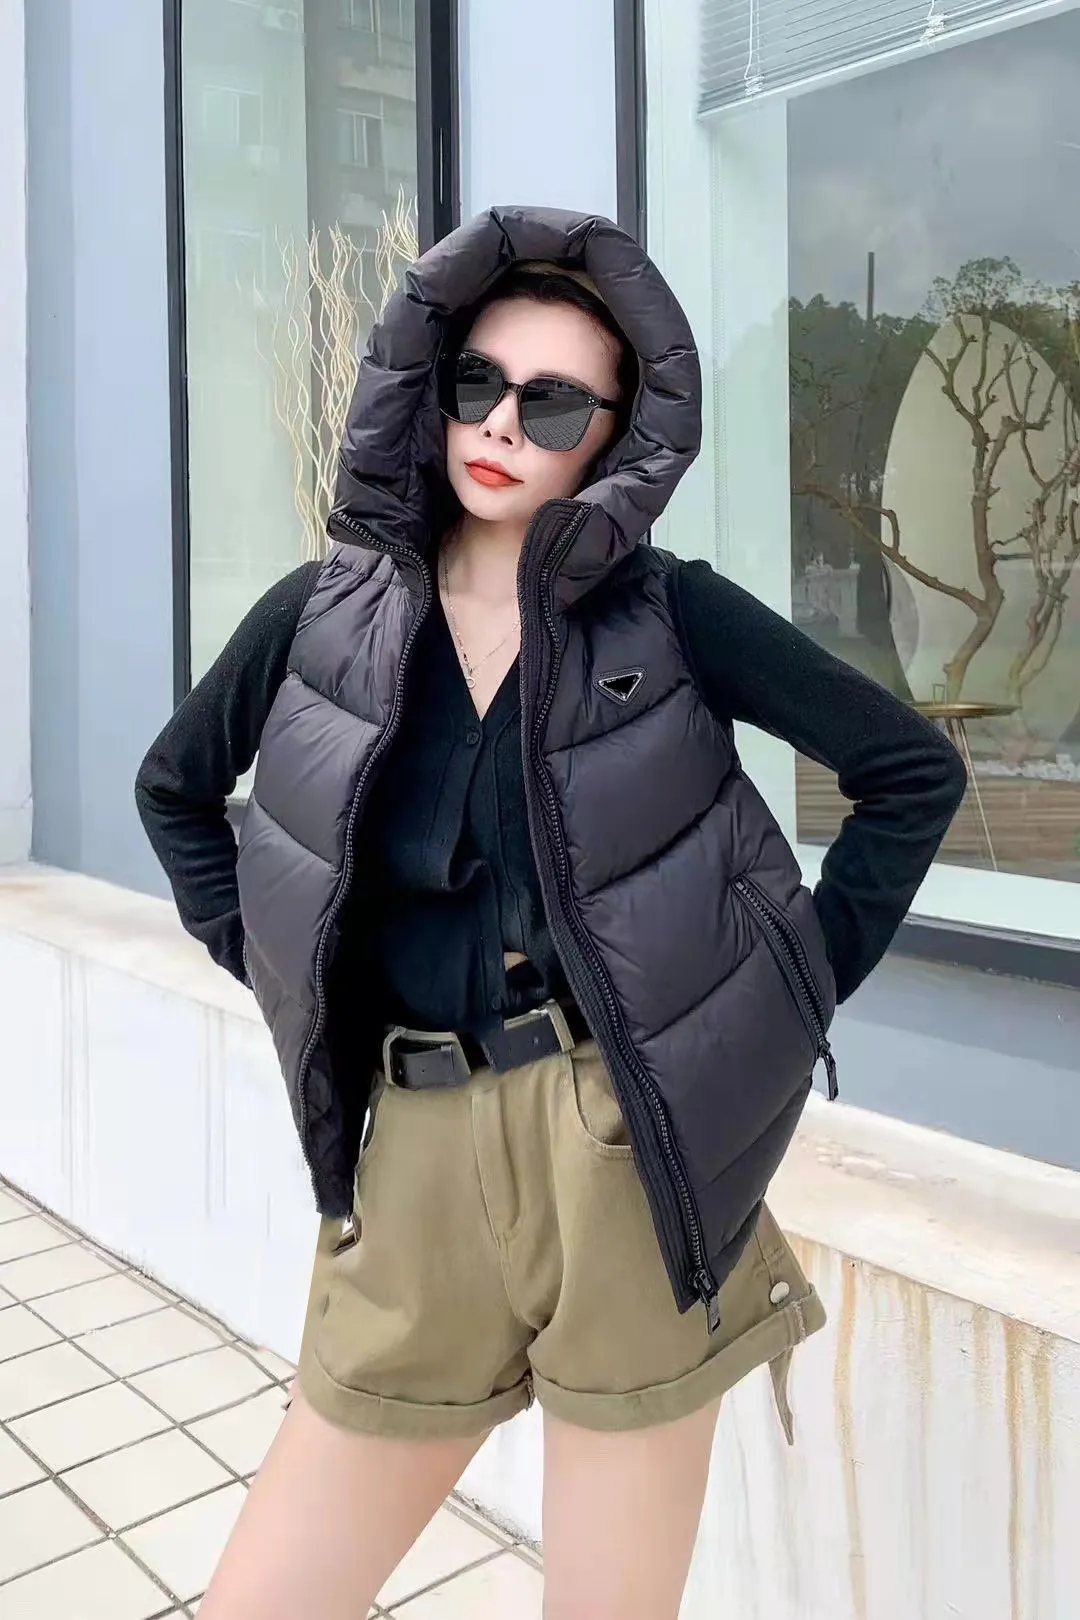 Women Fashion Vests Down Parkas Jacket Autumn Winter Warm Thick Coats For Lady Slim Style Jackets Hooded Sleeveless Windbreaker 3 Options Size S-L